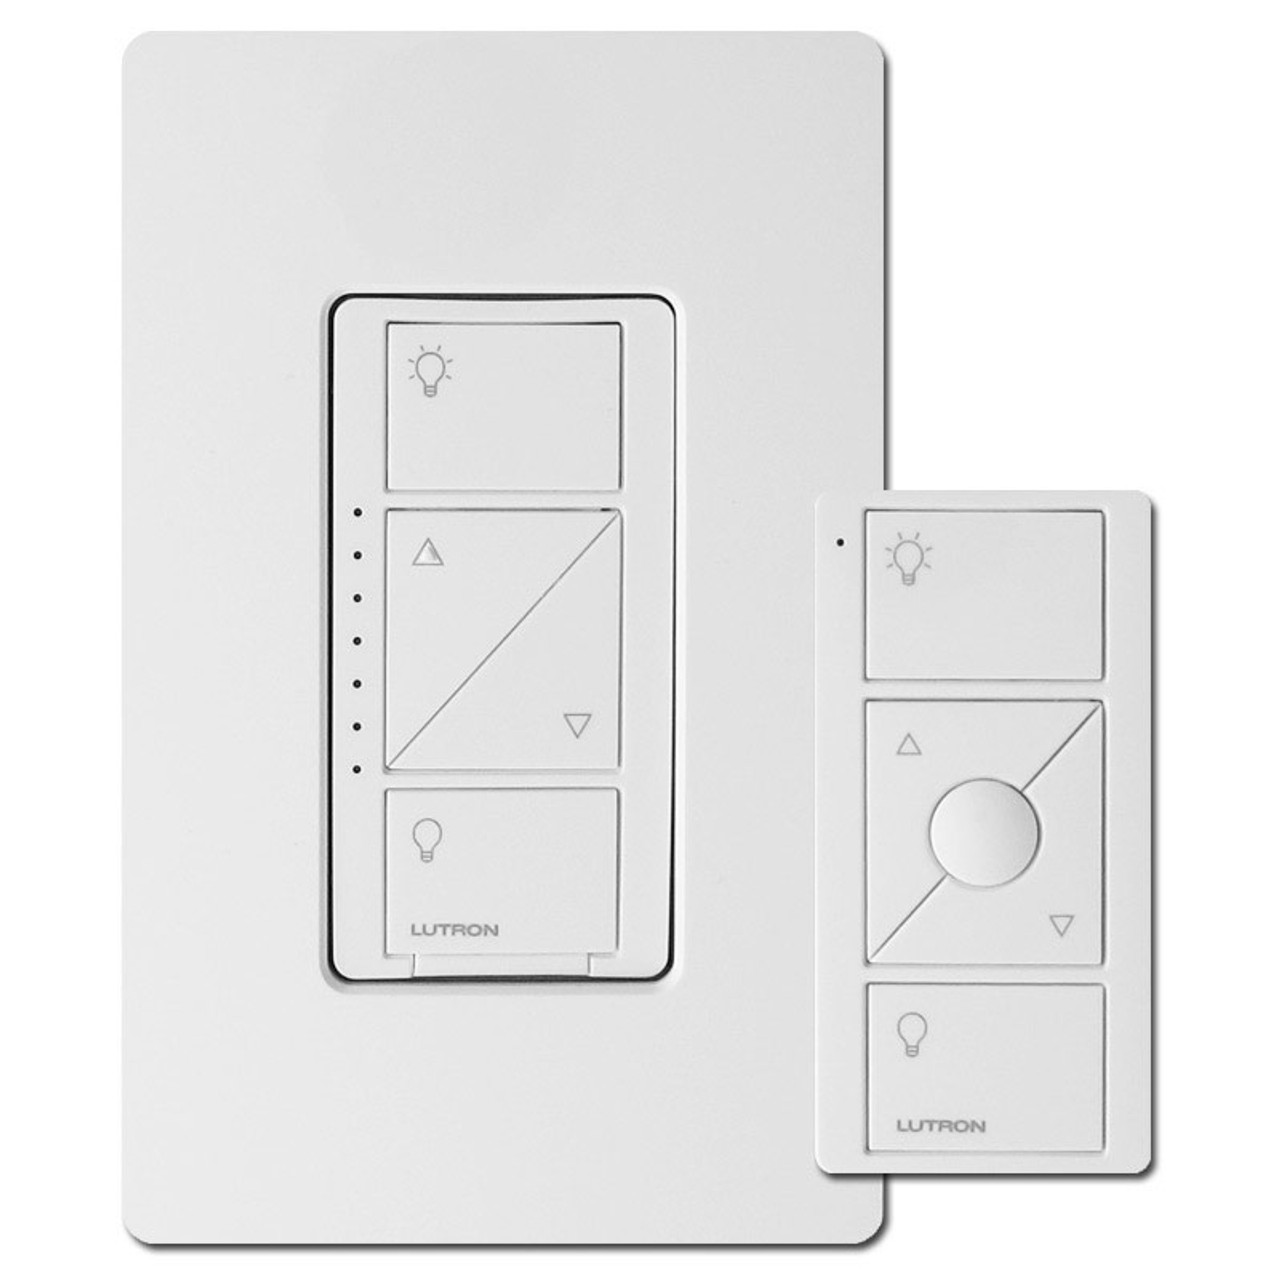 https://cdn11.bigcommerce.com/s-wlejmk/images/stencil/1280x1280/products/5477/21919/caseta-wireless-in-wall-dimmer-plus-pico-remote-control-lutron-lut-p-pkg1w-wh--wall__65311.1532112845.jpg?c=2